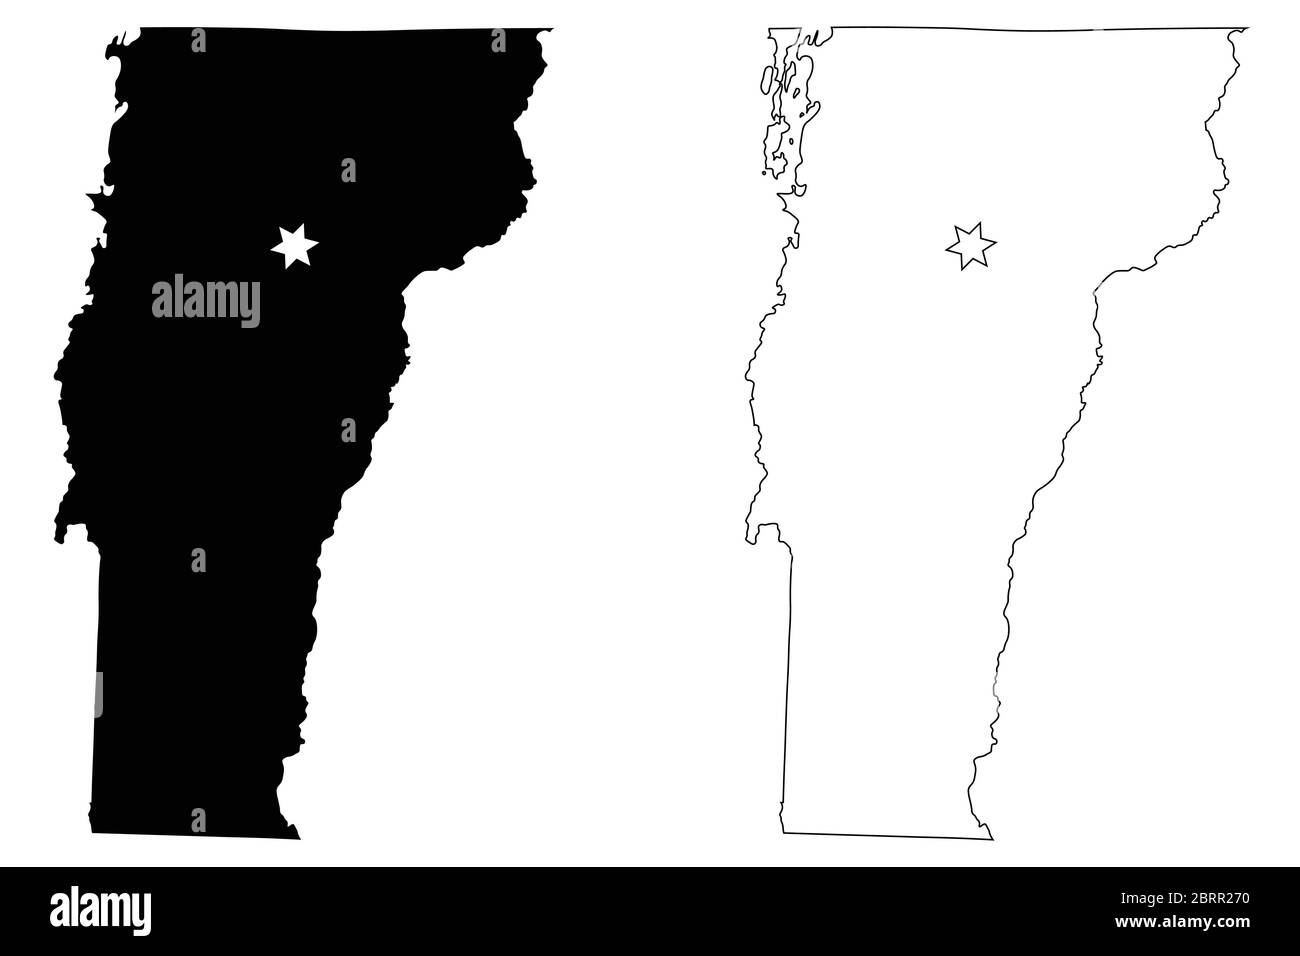 Vermont VT state Map USA with Capital City Star at Montpelier. Black silhouette and outline isolated maps on a white background. EPS Vector Stock Vector